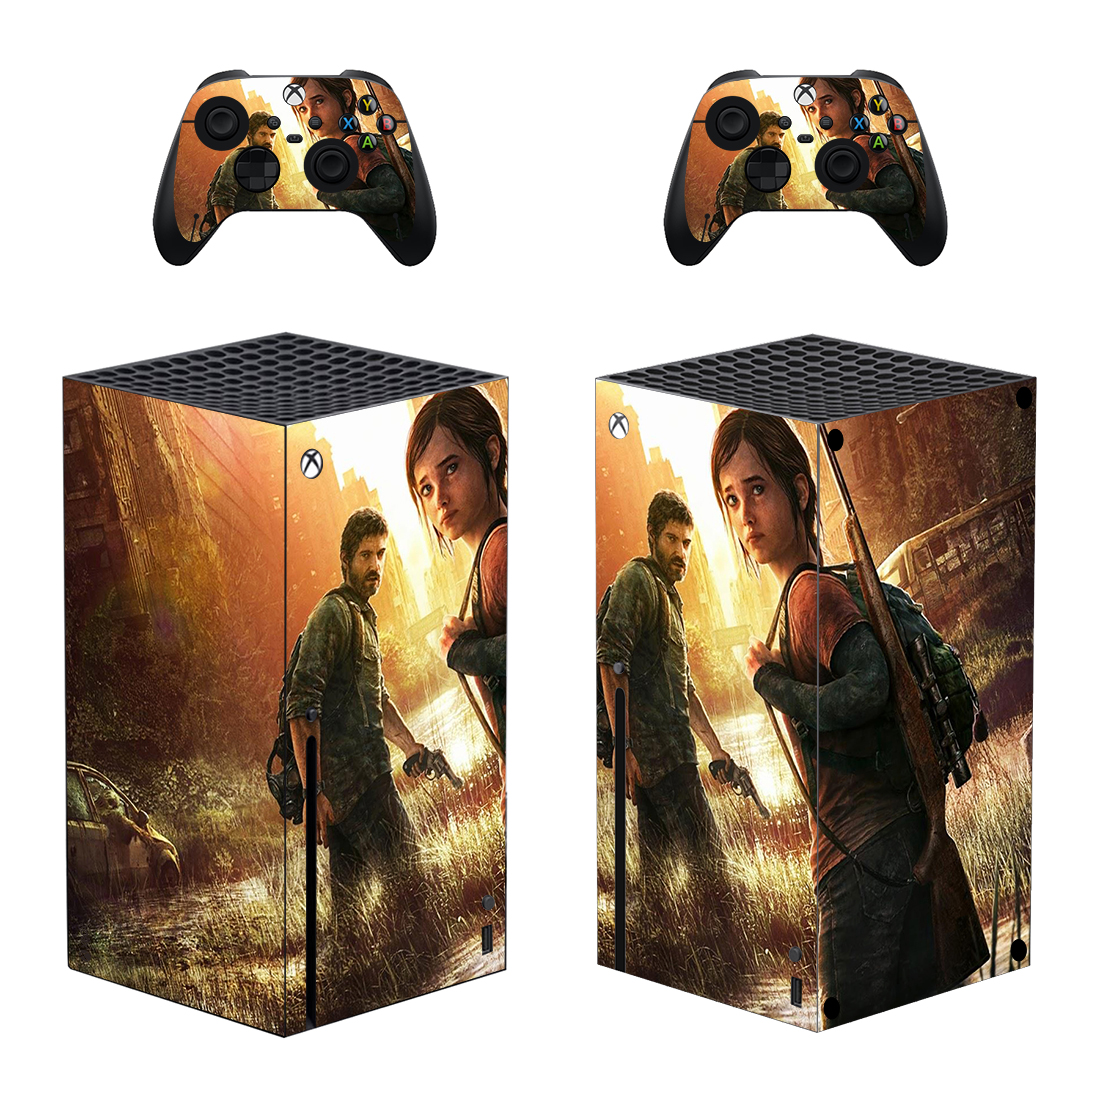 the last of us xbox 360 part 1